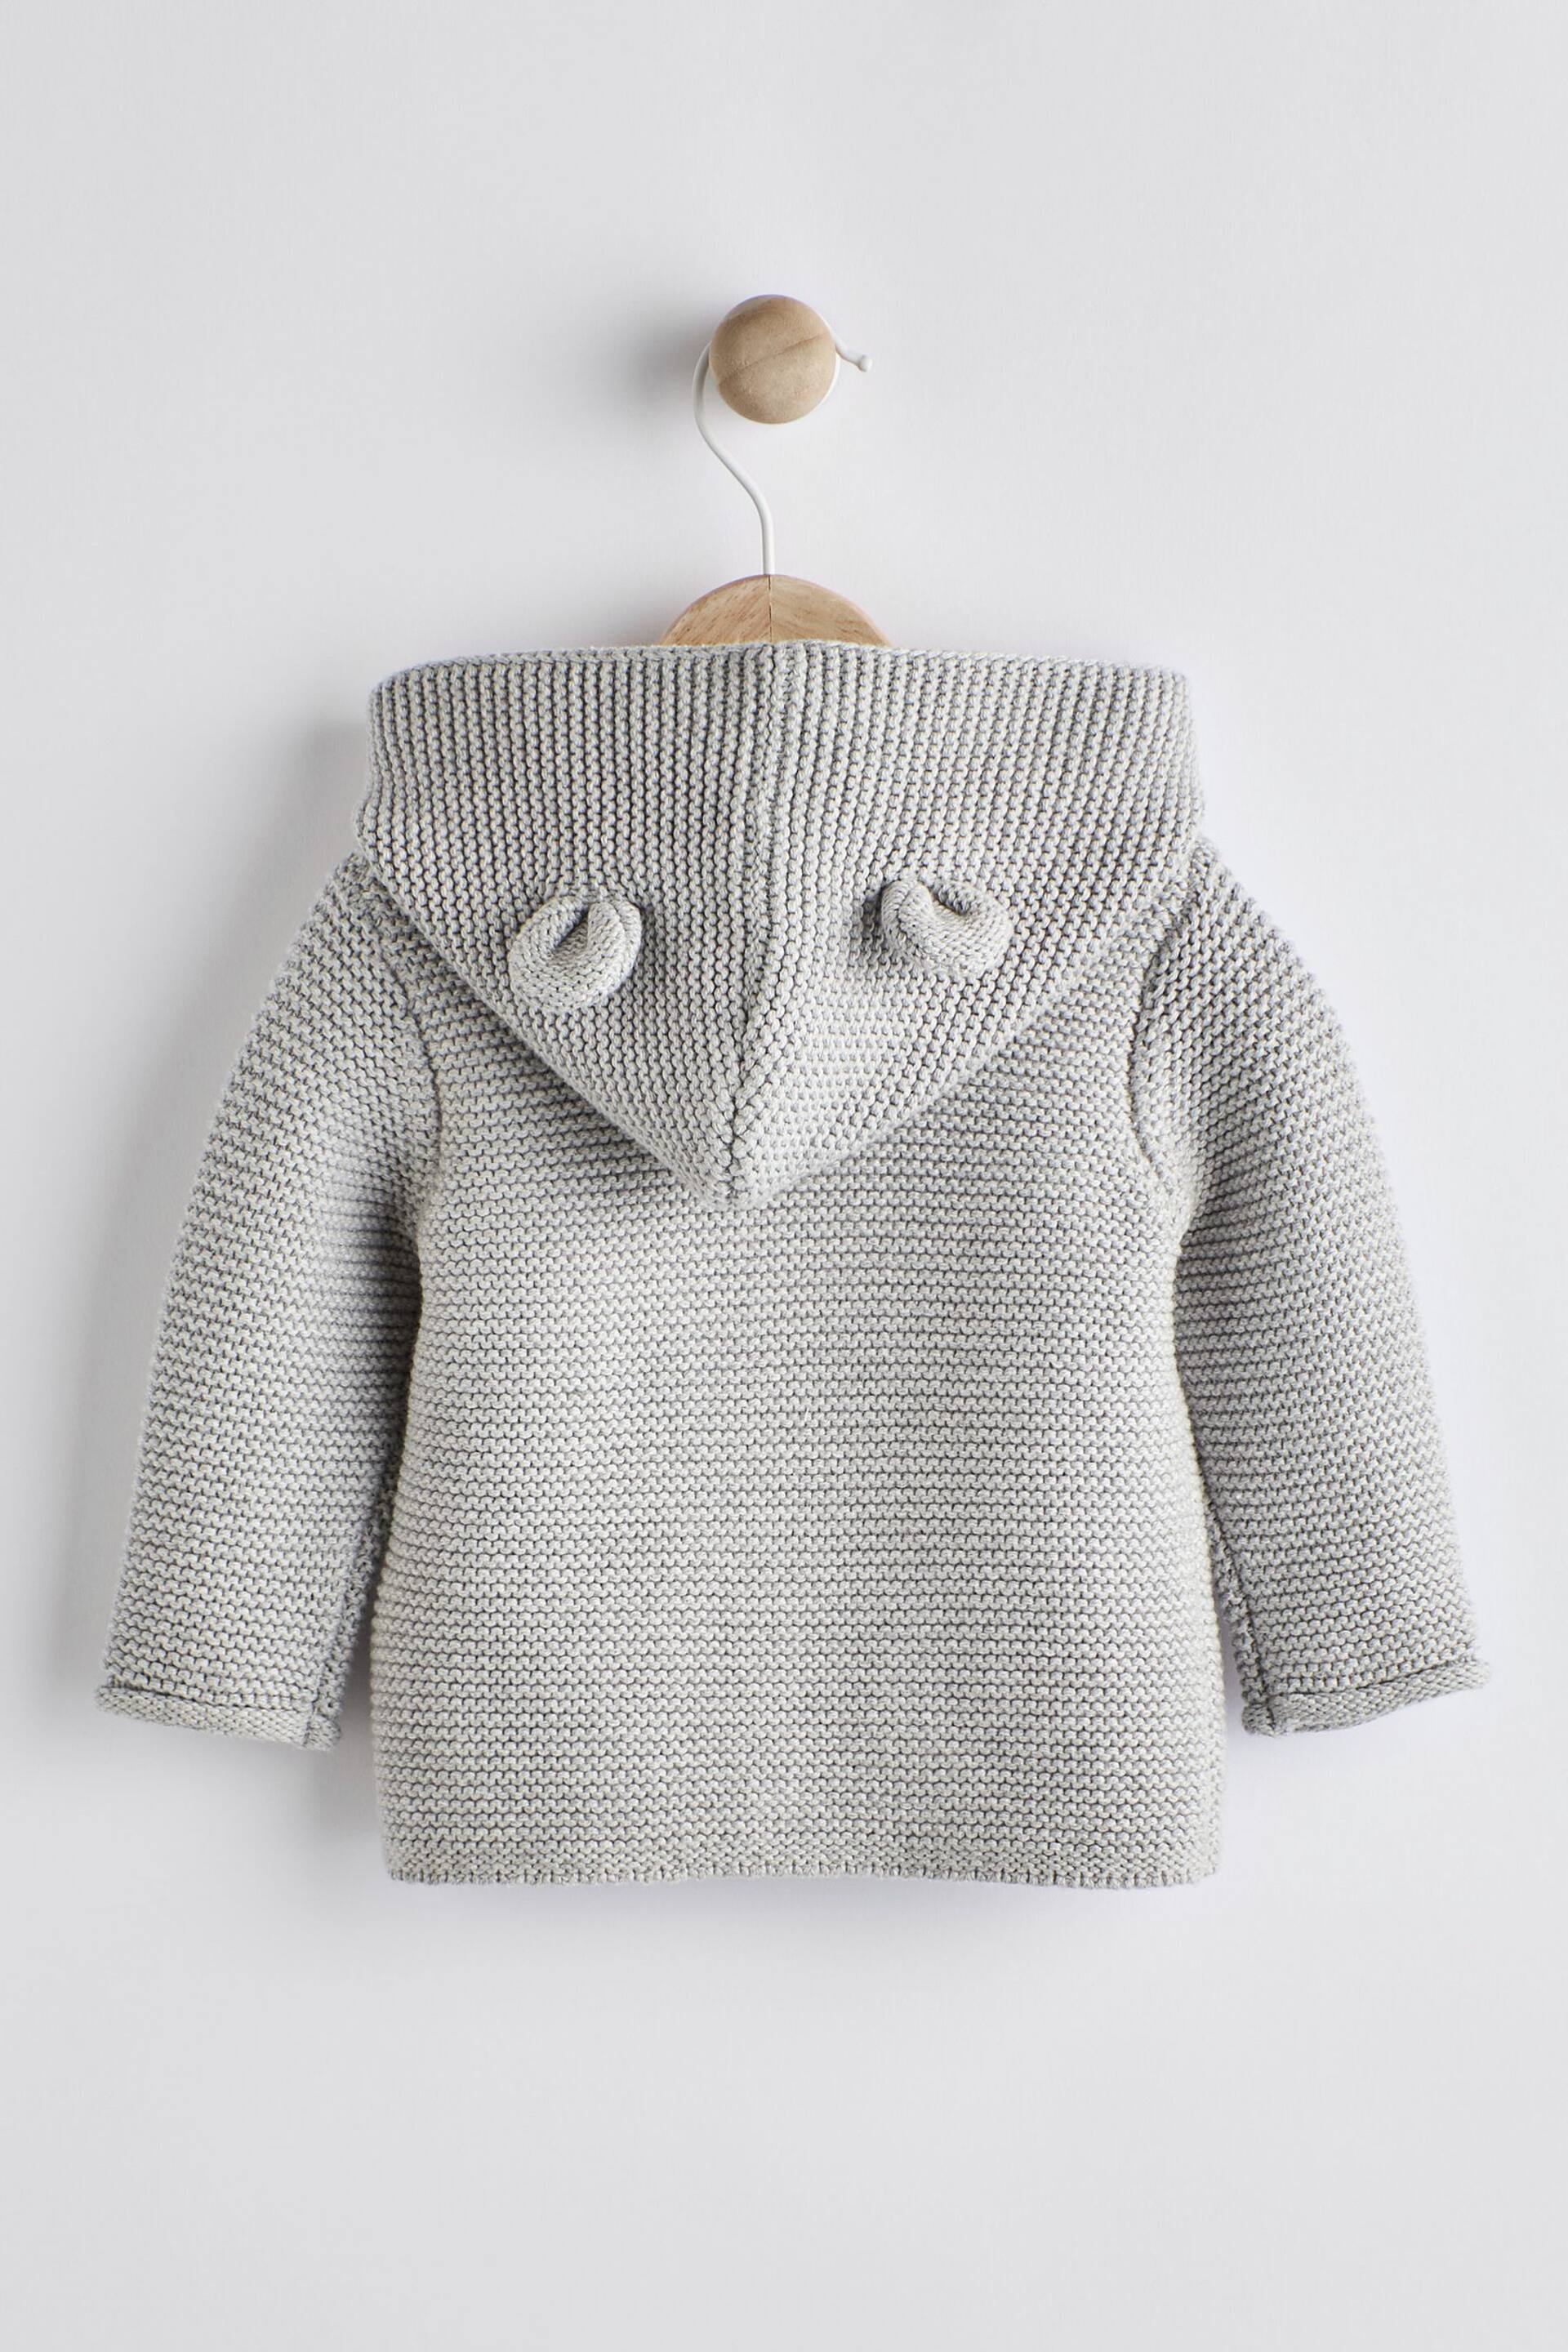 Grey Baby Knitted Cardigan (0mths-3yrs) - Image 2 of 7